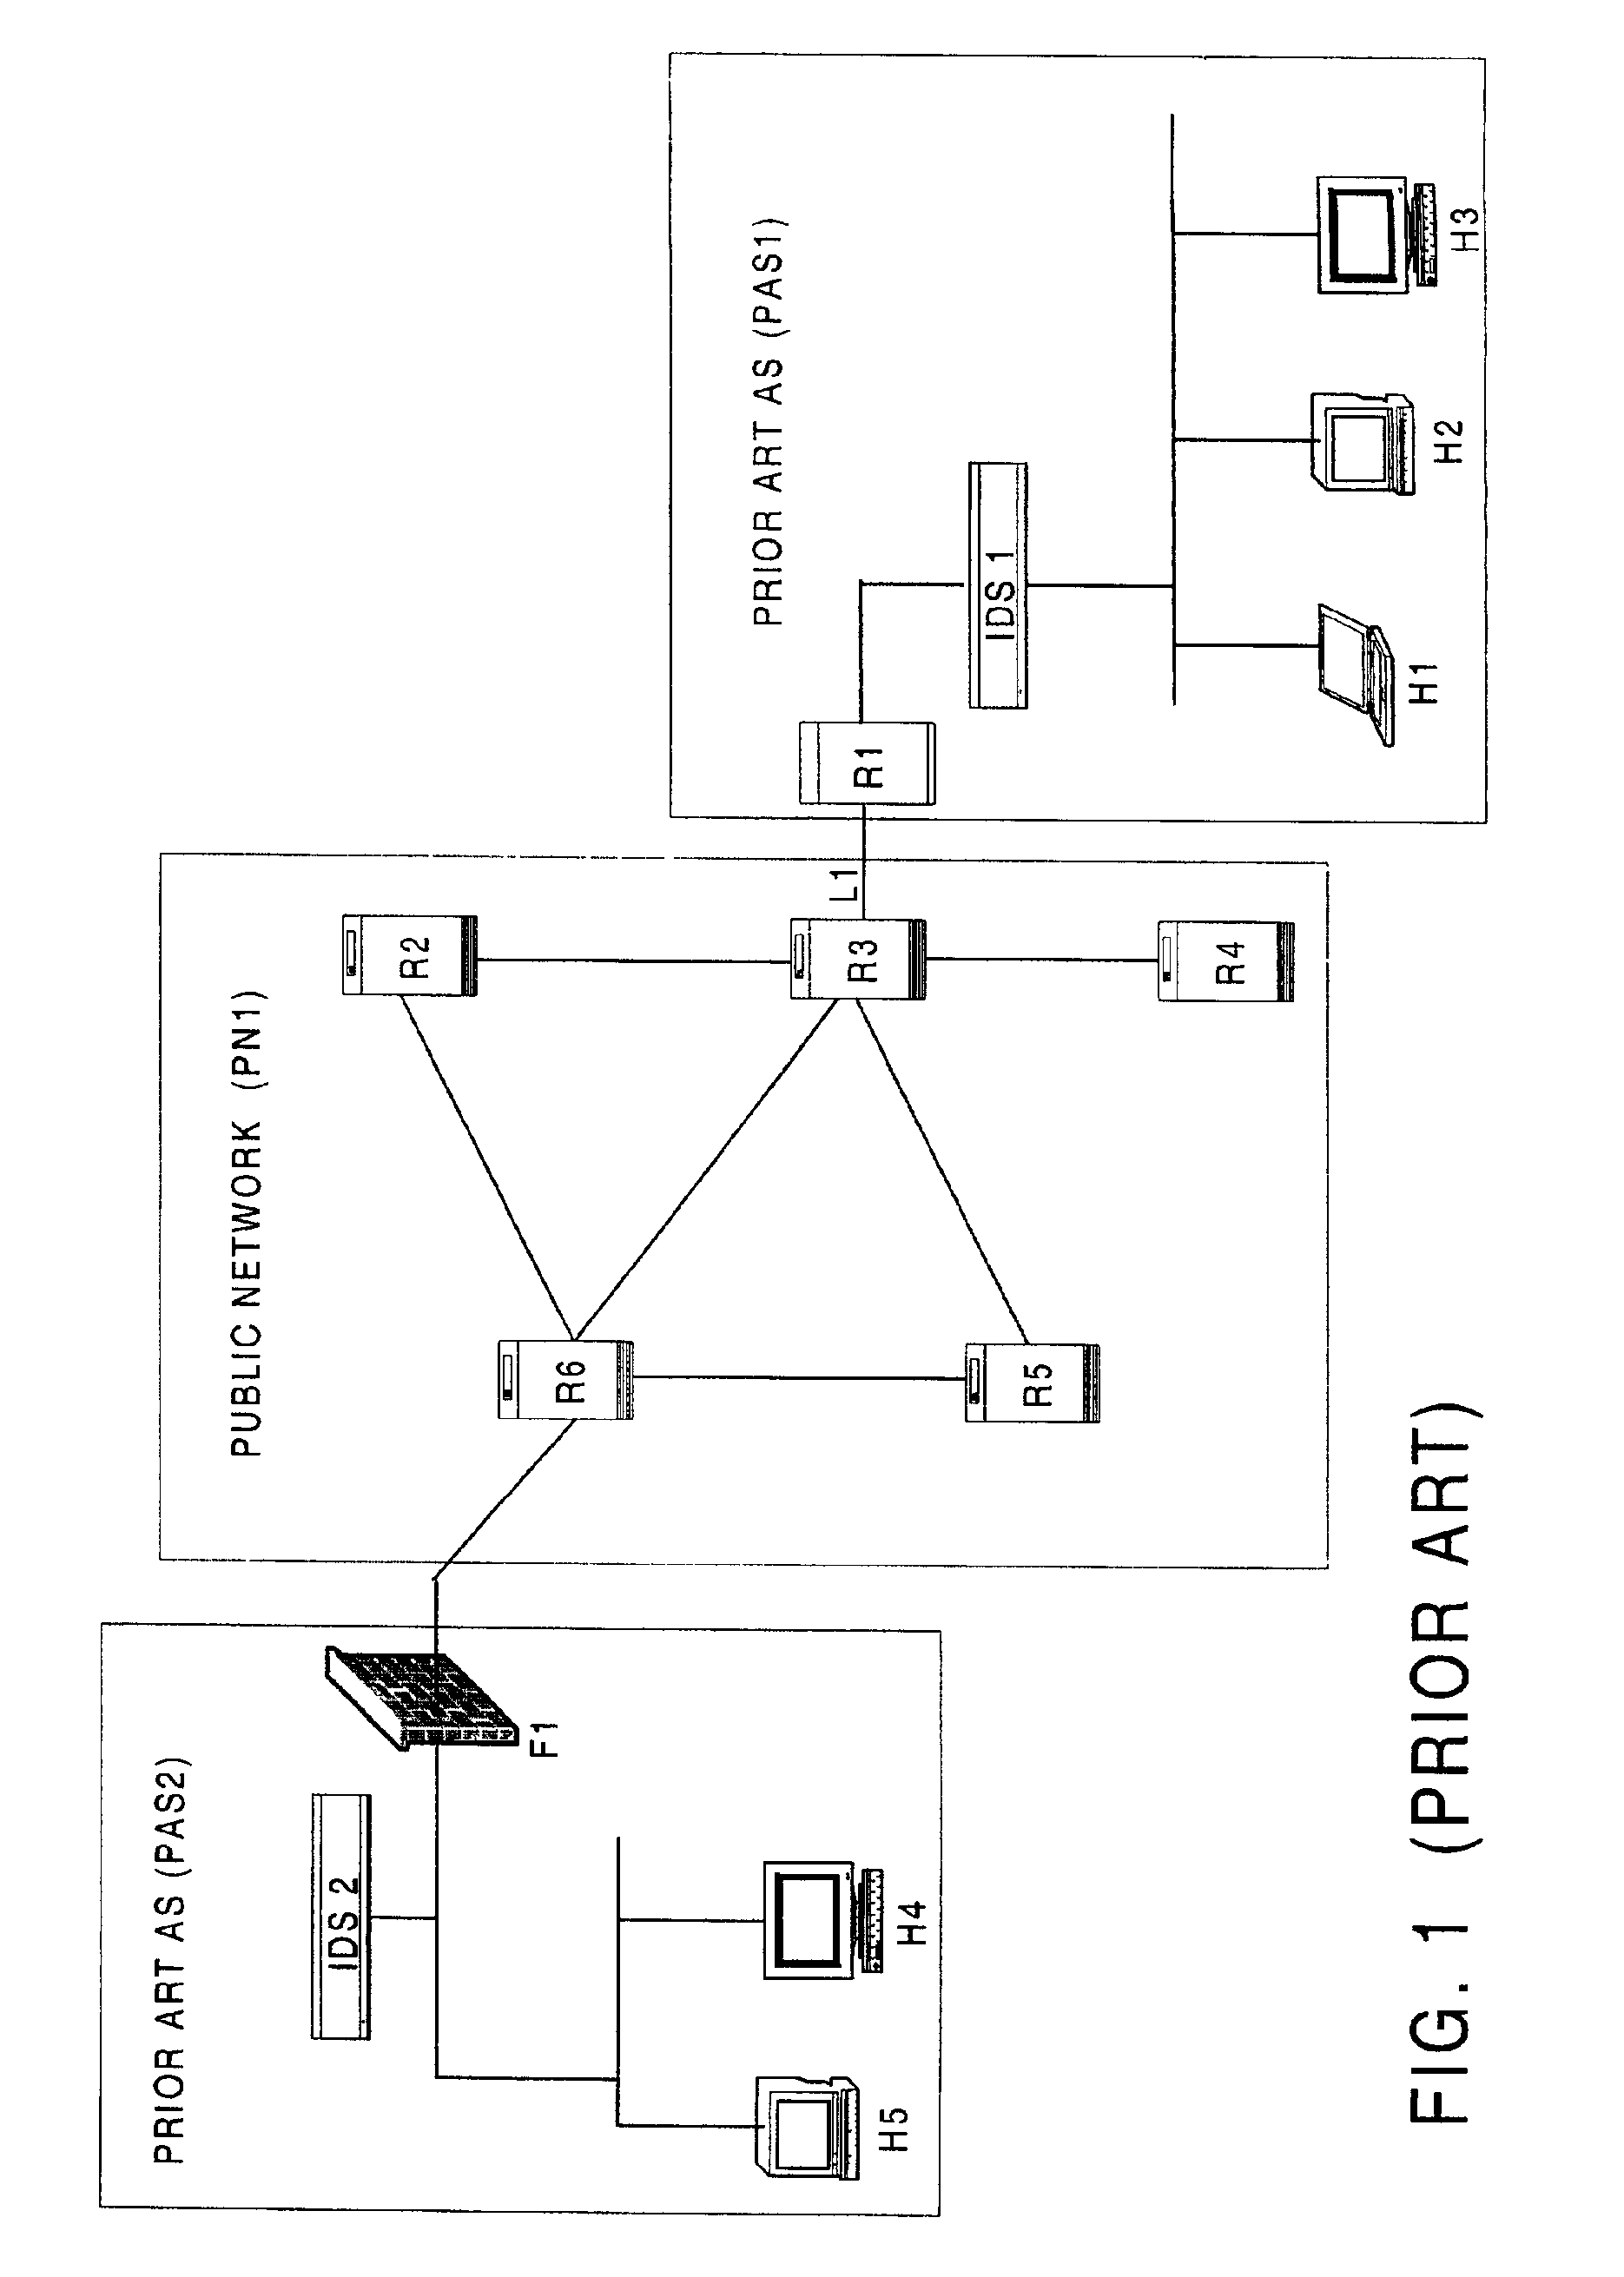 Method and apparatus for tracing packets